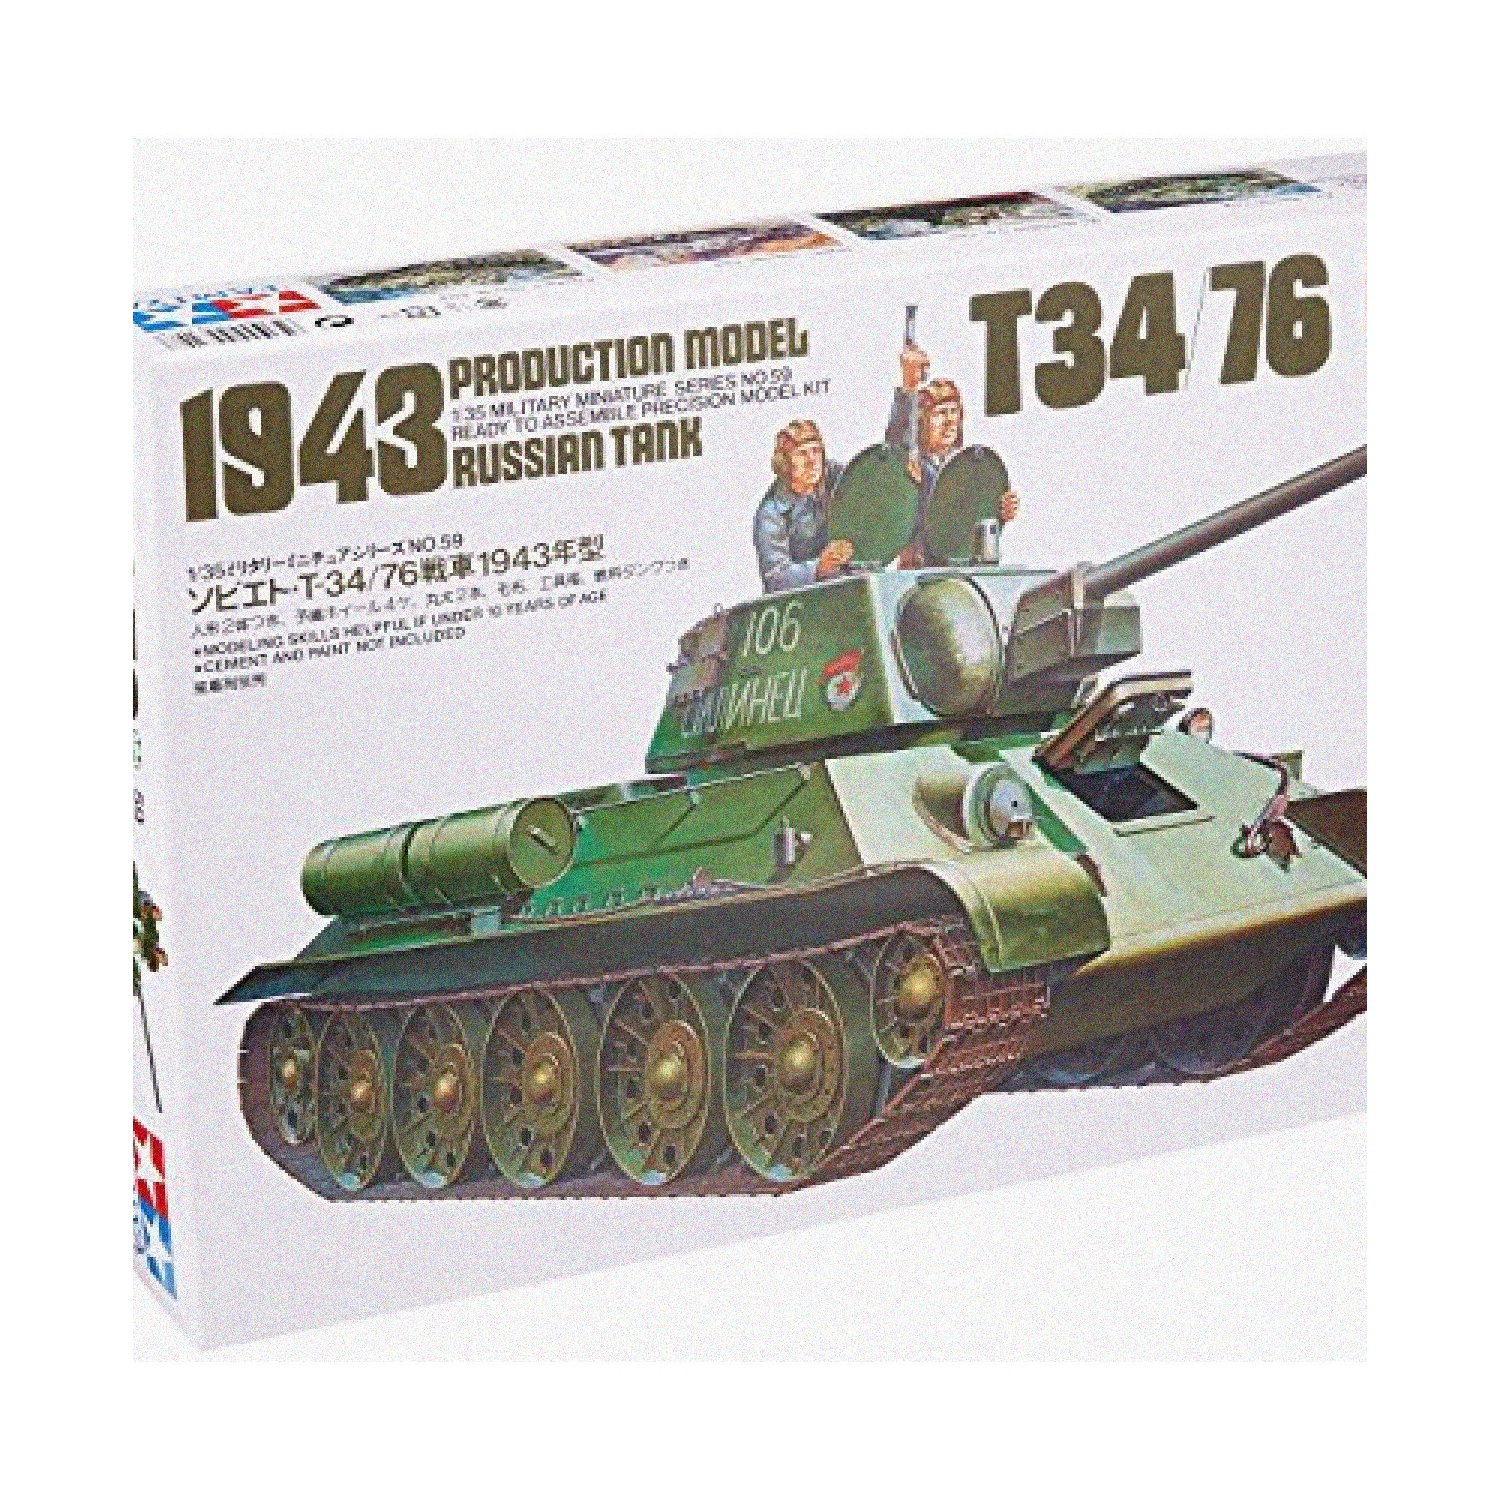 Battlefield Legends: Russian T34/76 1943 Tank Model Kit - Unleash Your Inner Commander with this Authentic 1/35 Scale Plastic Masterpiece!